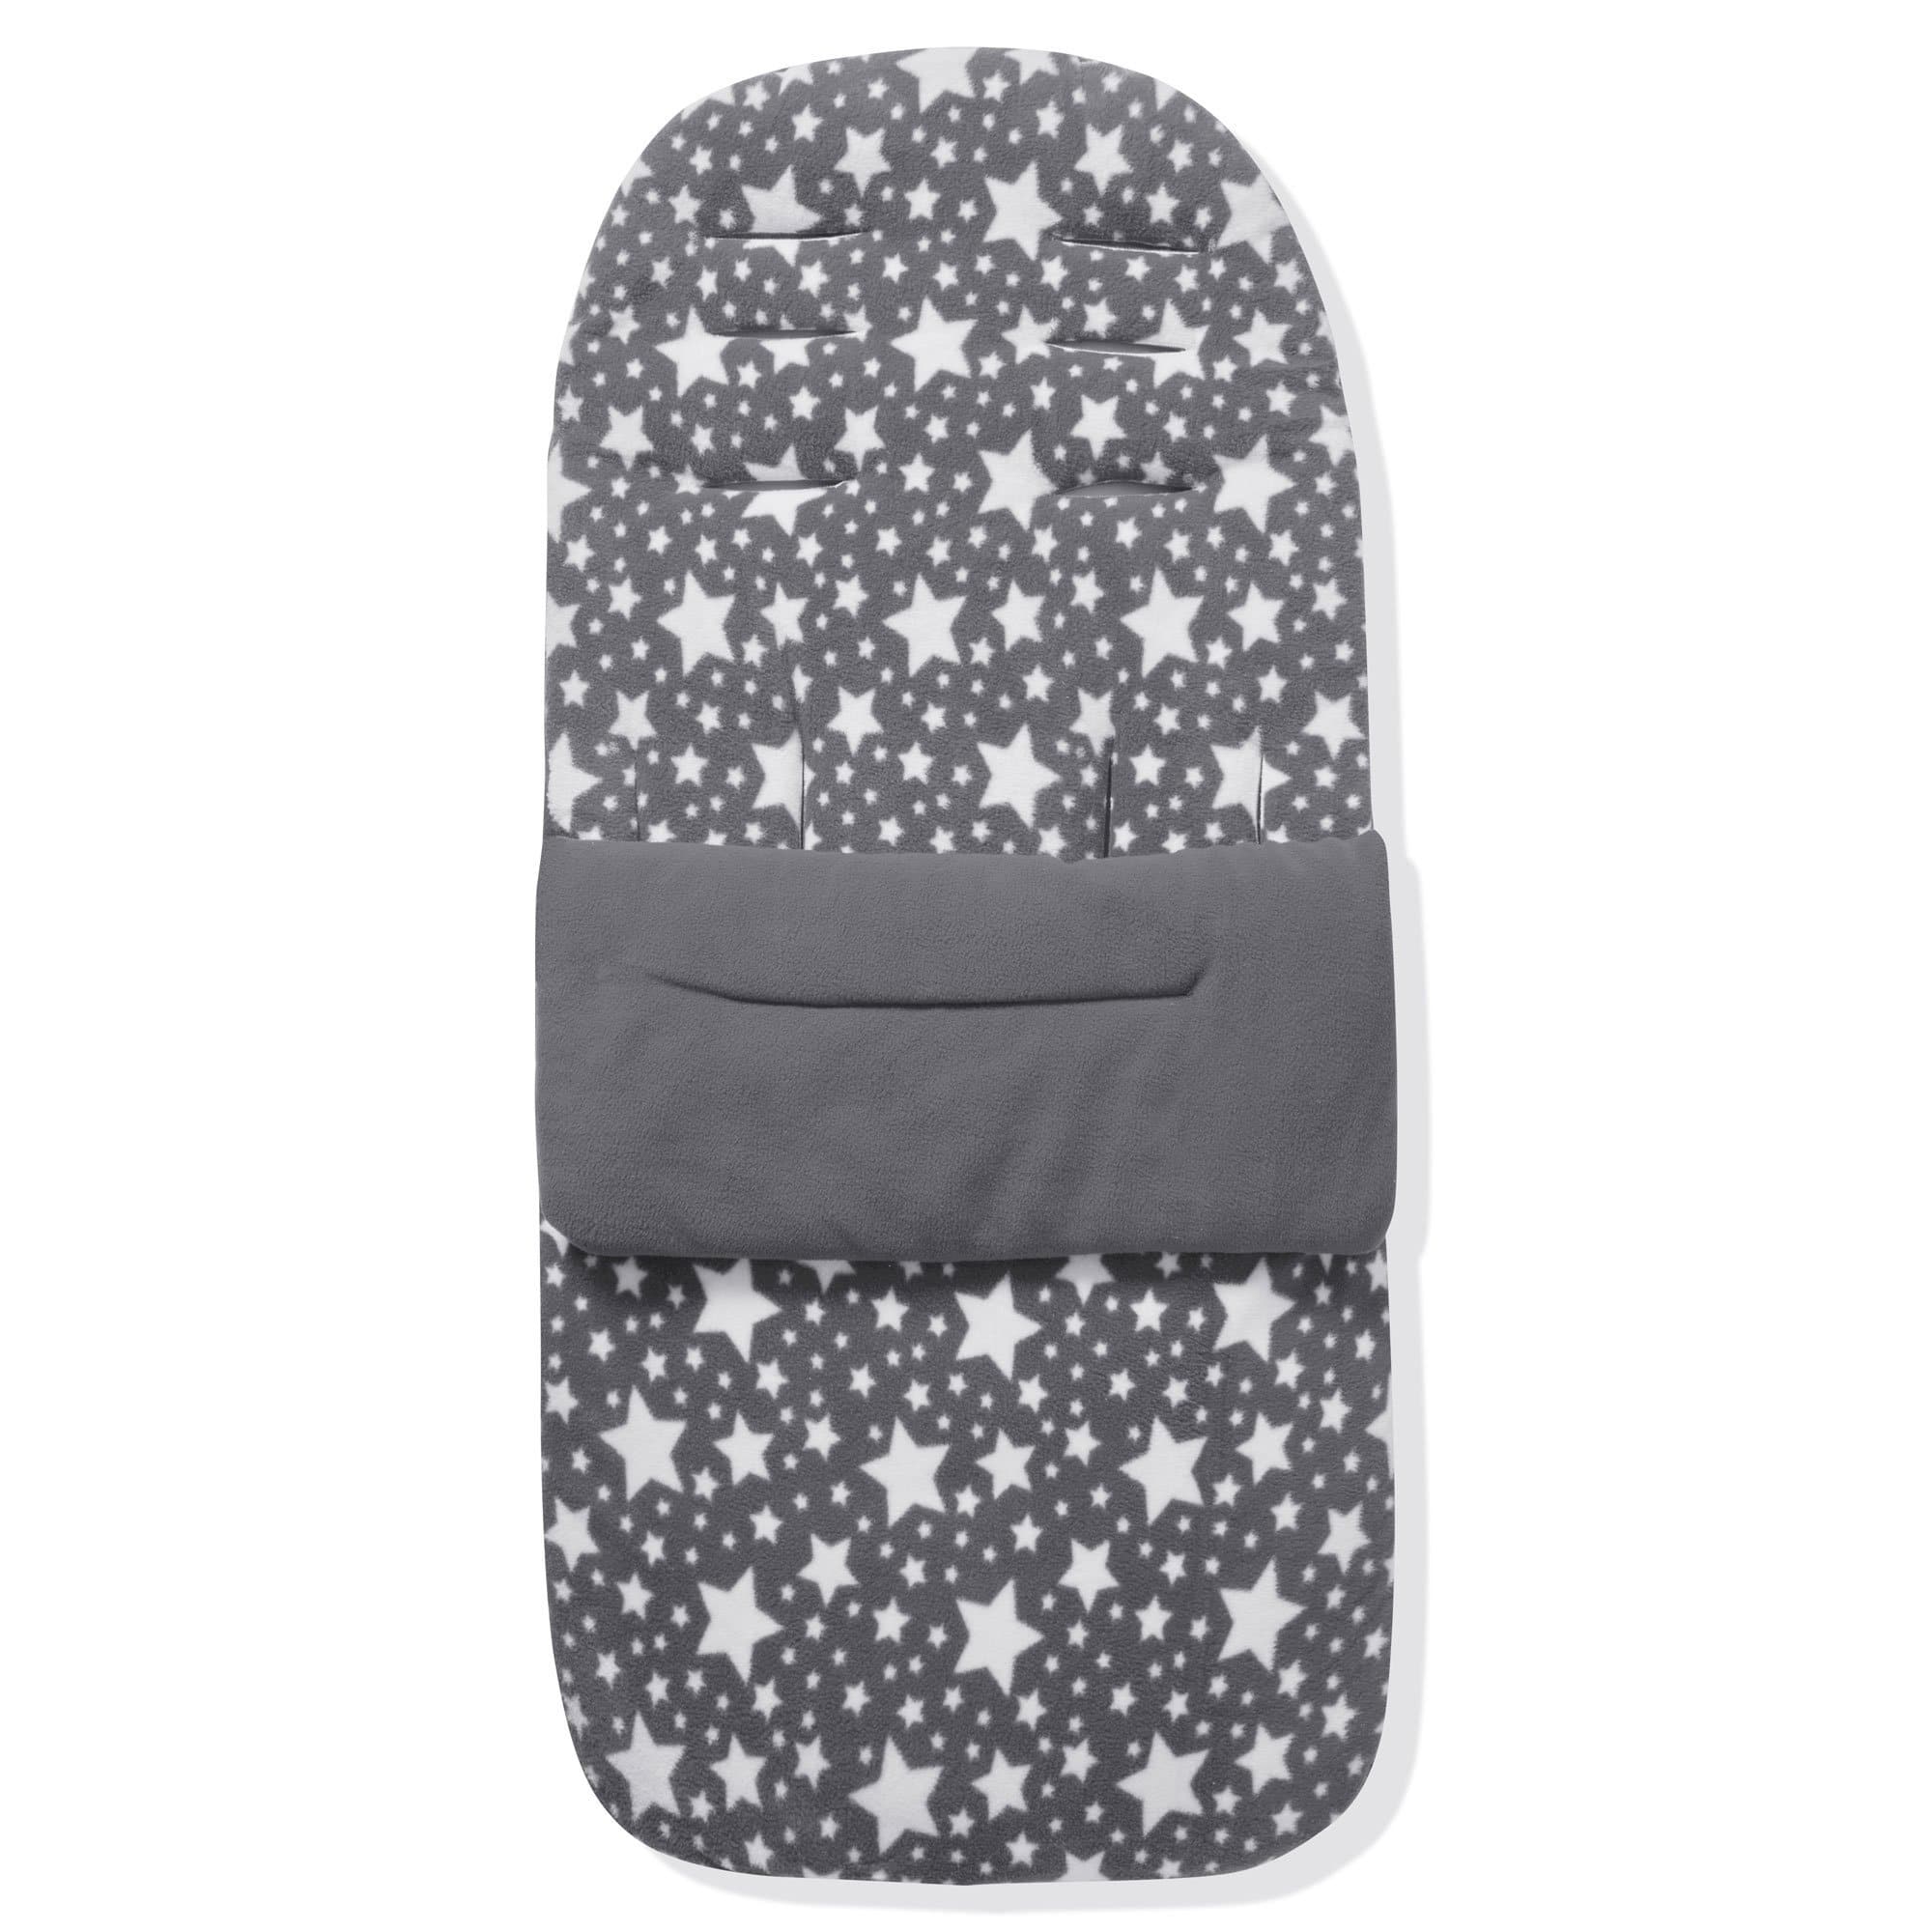 Fleece Footmuff / Cosy Toes Compatible With Cam - Grey Star / Fits All Models | For Your Little One